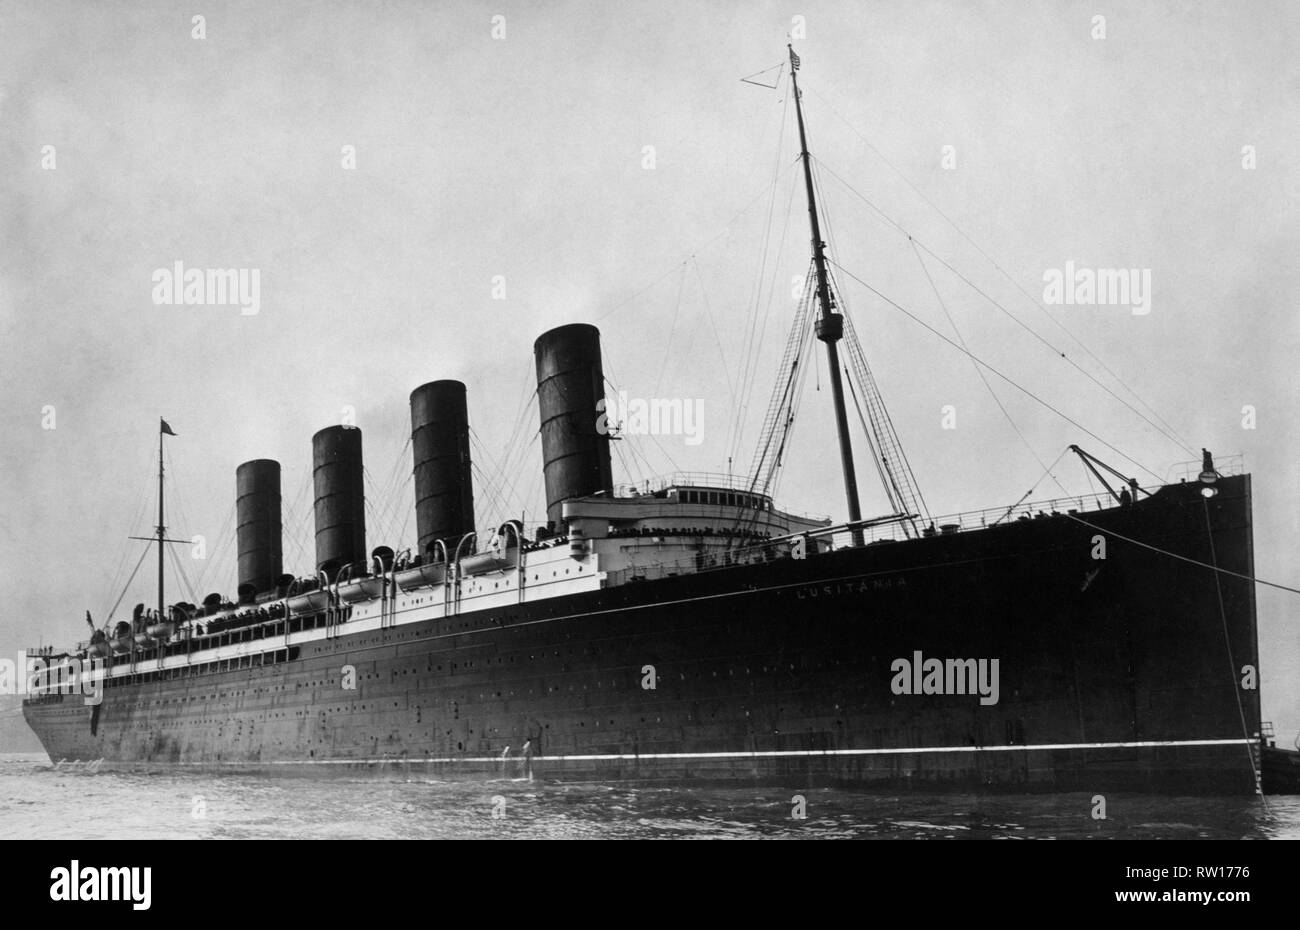 RMS Lusitania british ocean liner and briefly the worlds largest passneger ship sunk by a uboat on 7th May 1915 off the south coast of ireland  Image updated using digital restoration and retouching techniques Stock Photo